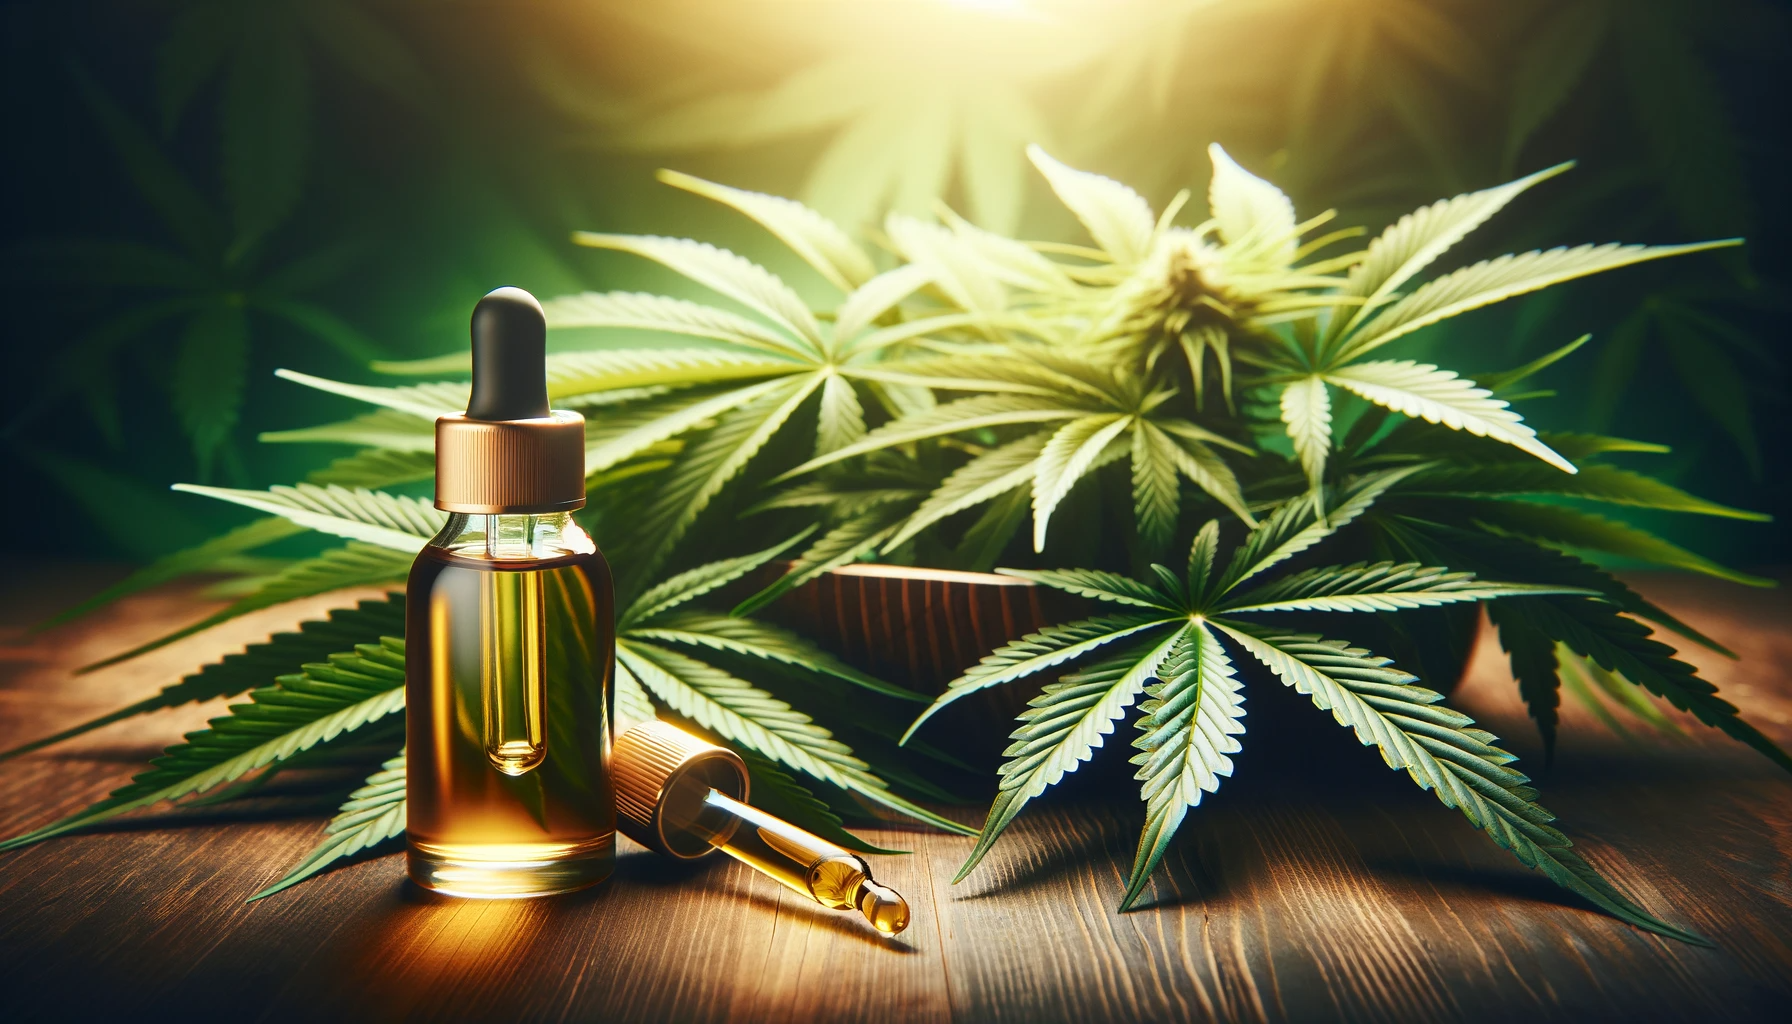 How to maximize the benefits of CBD for Wellness and Health